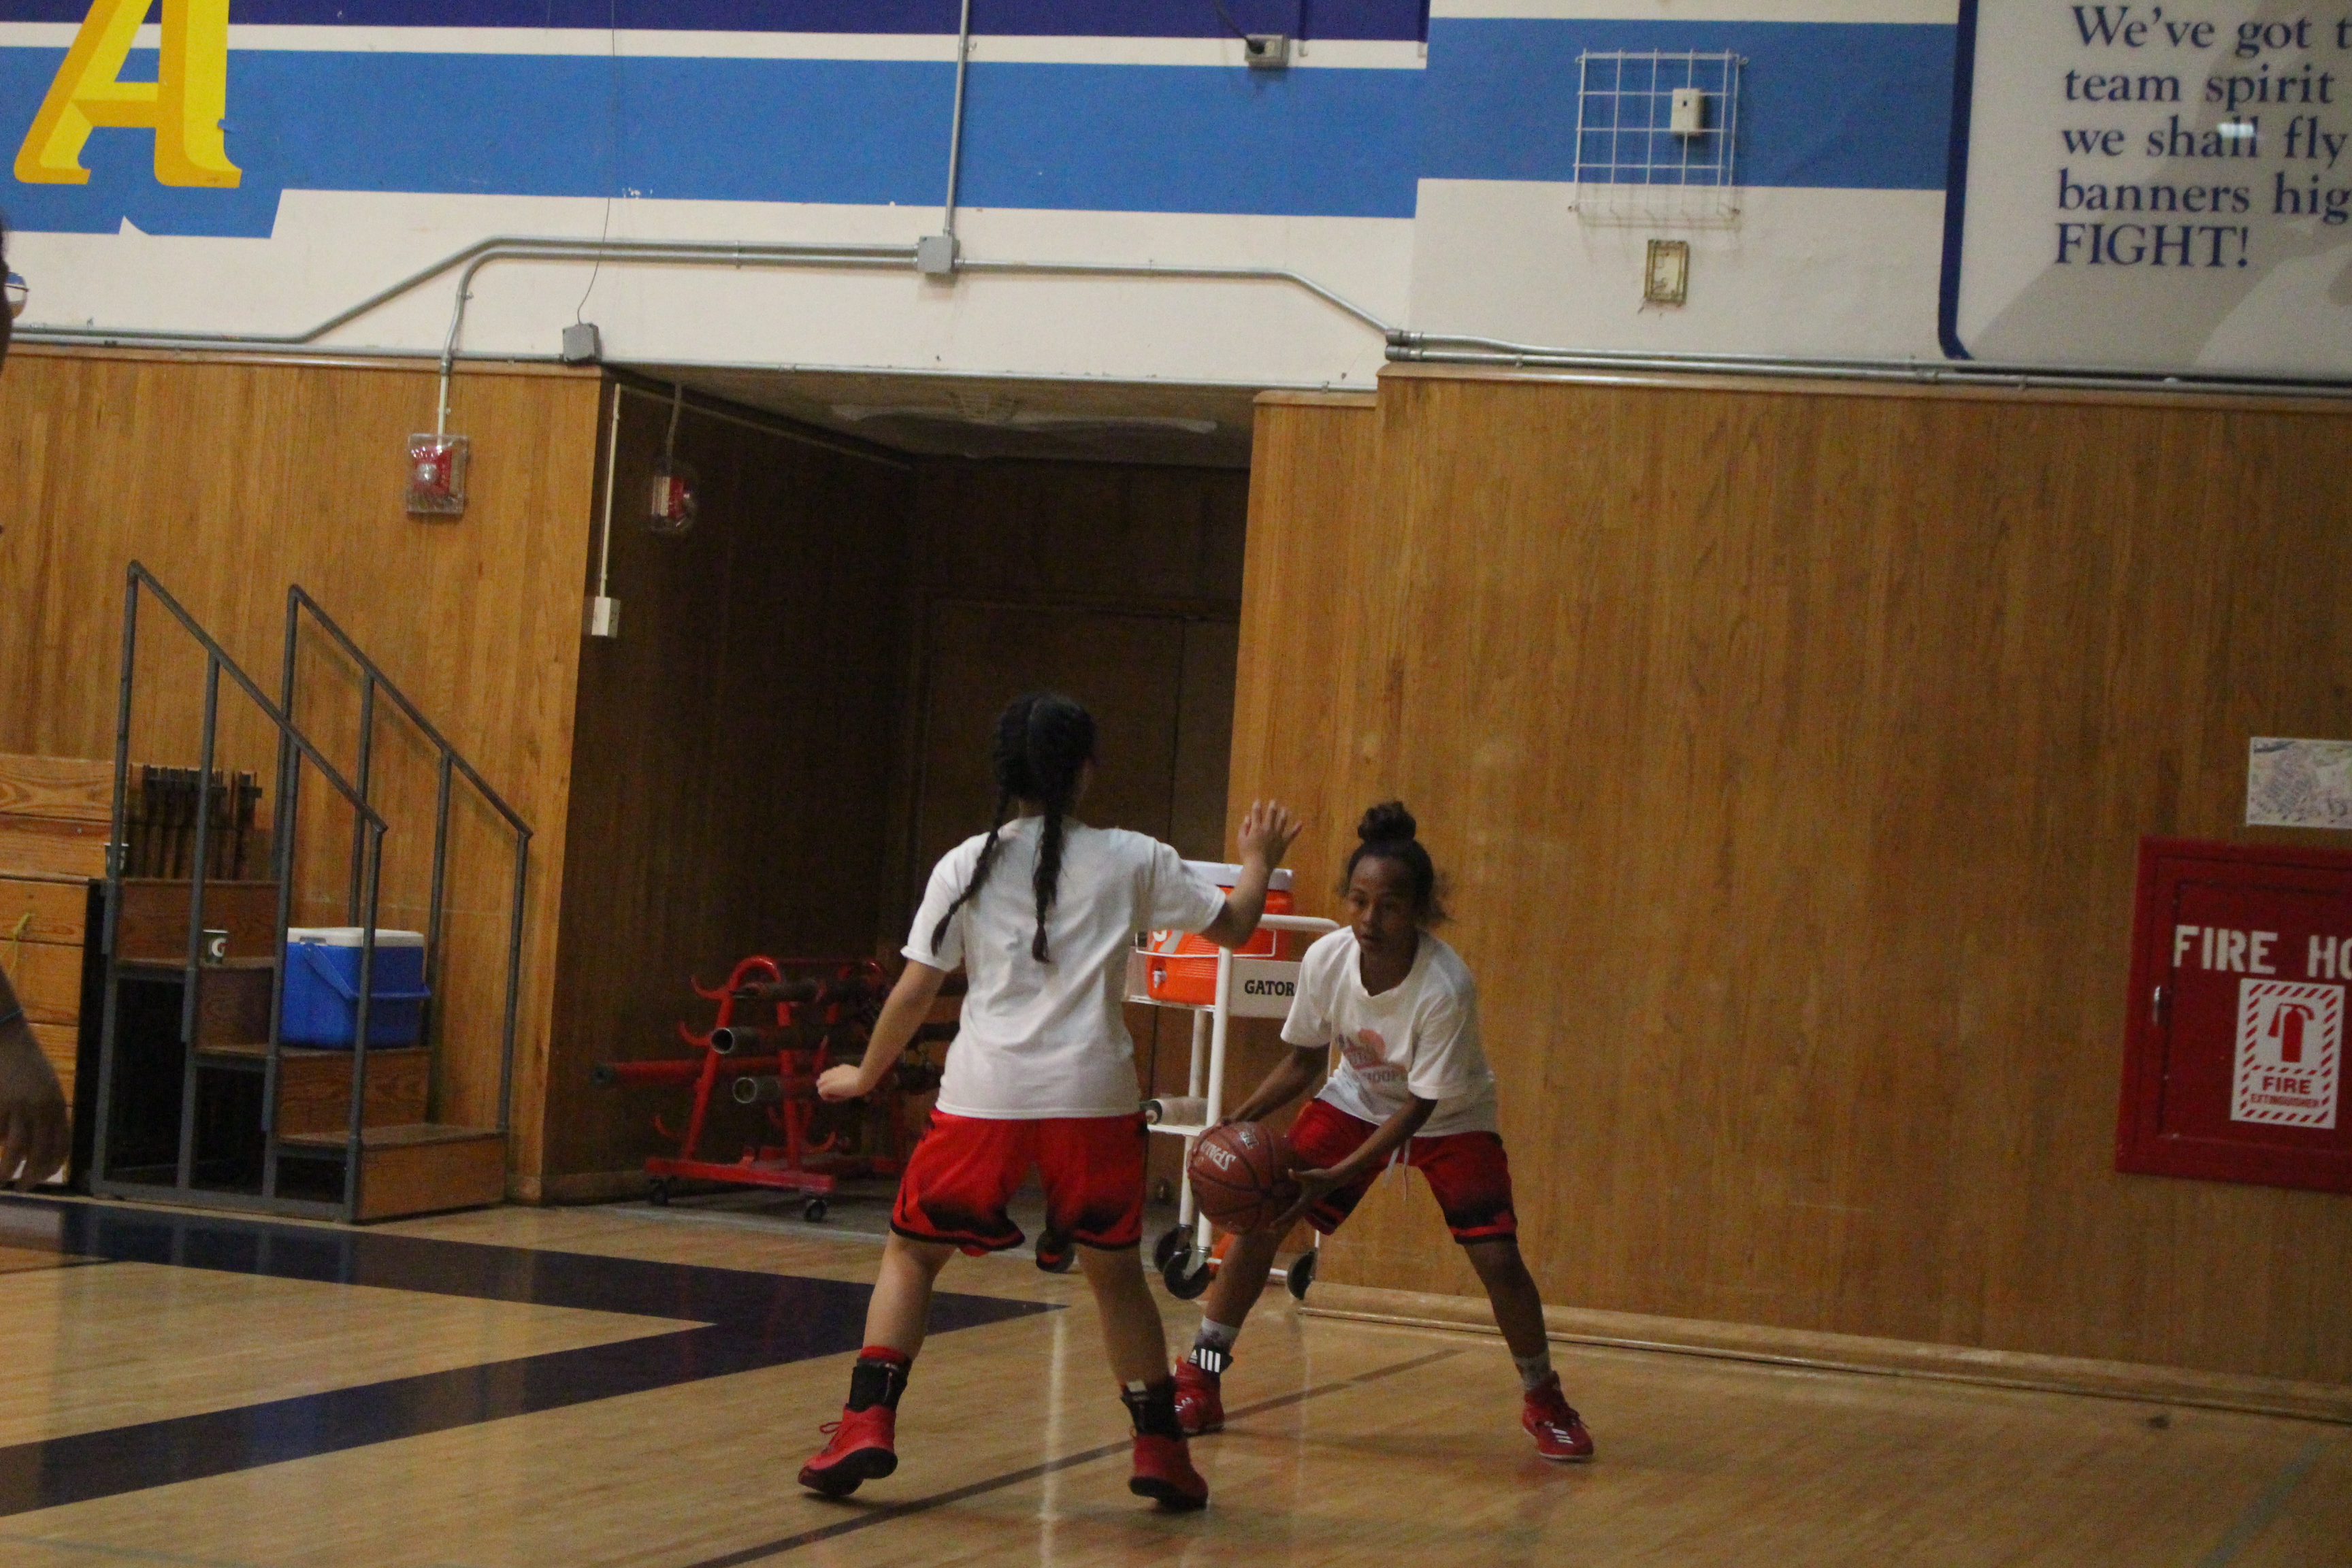 Two girls playing basketball in a gym.